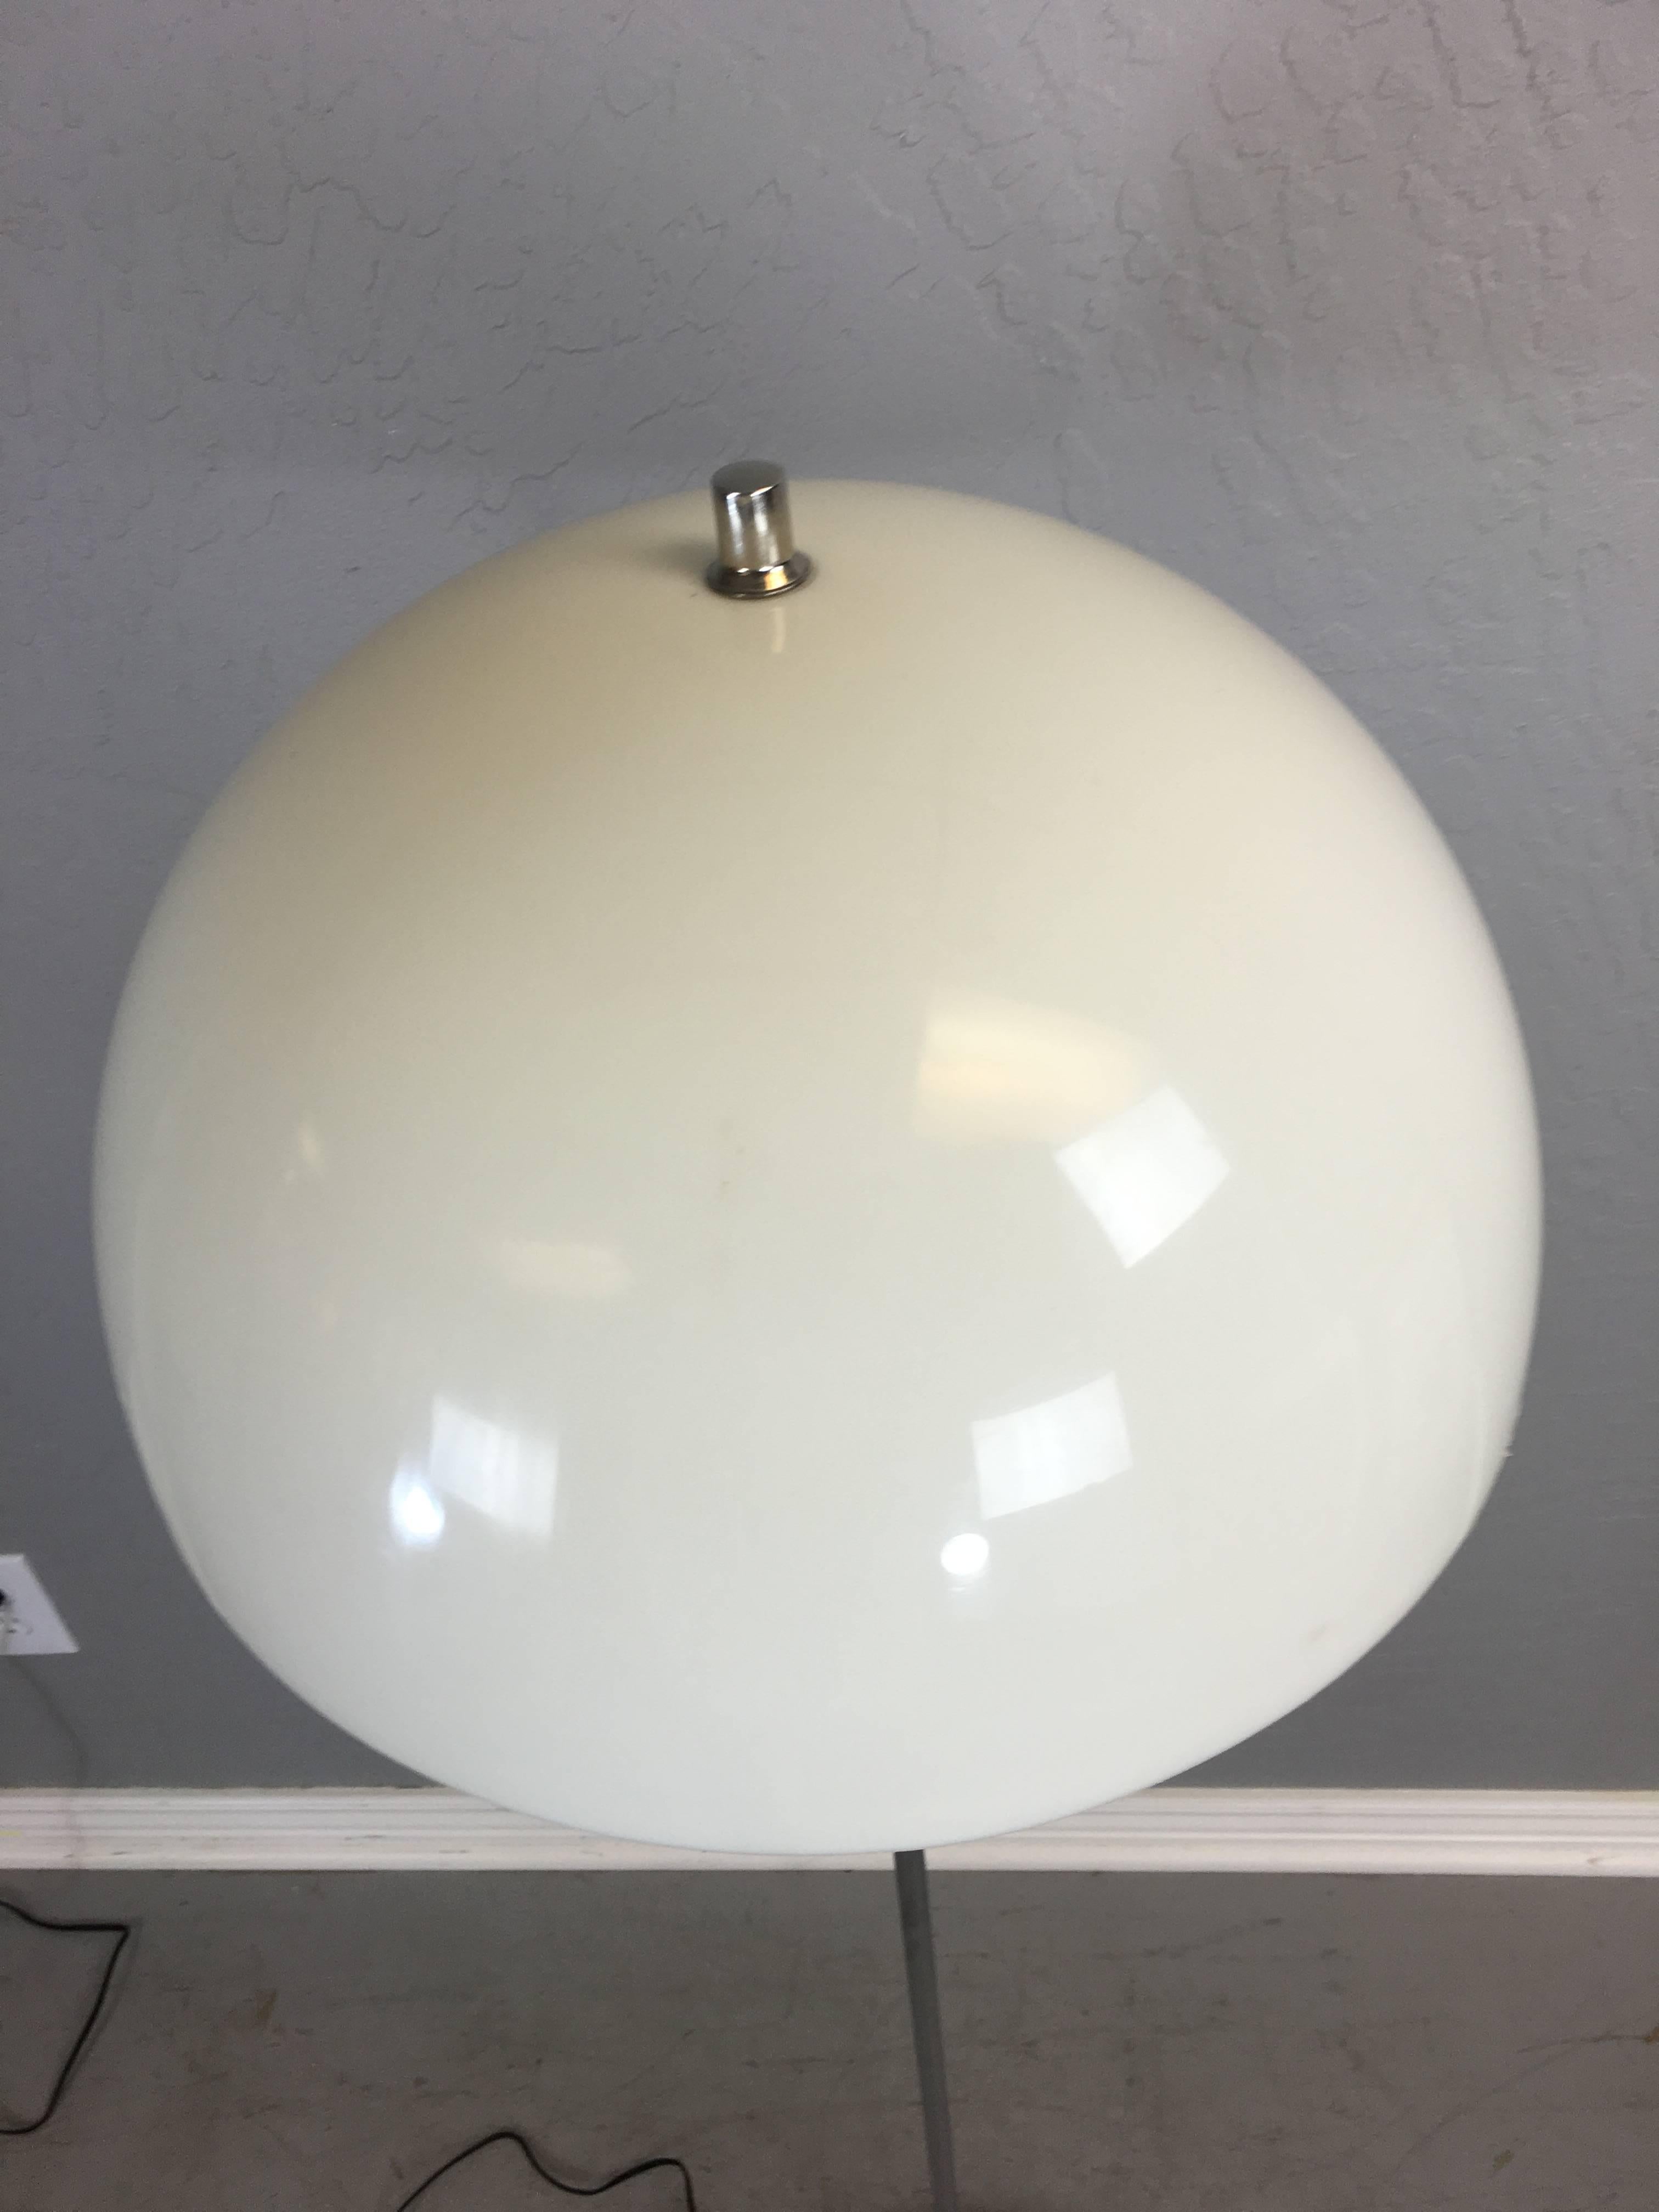 Mid-Century floor lamp with plastic dome shade. By underwriters laboratories.
Made in the USA. 54